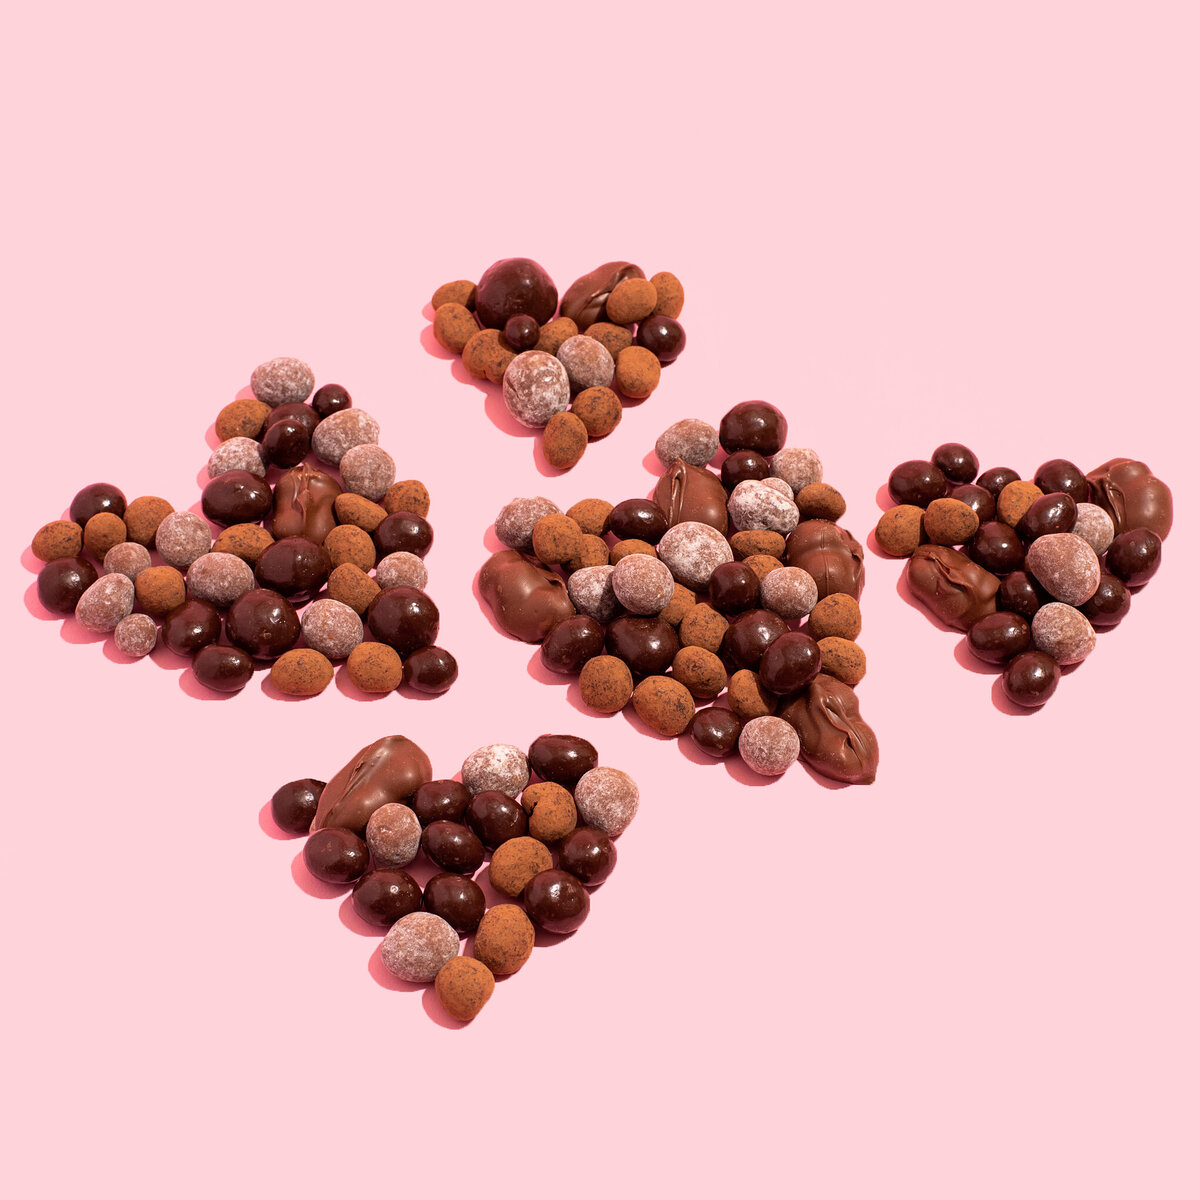 chocolate covered macadamia nuts in the shape of a heart